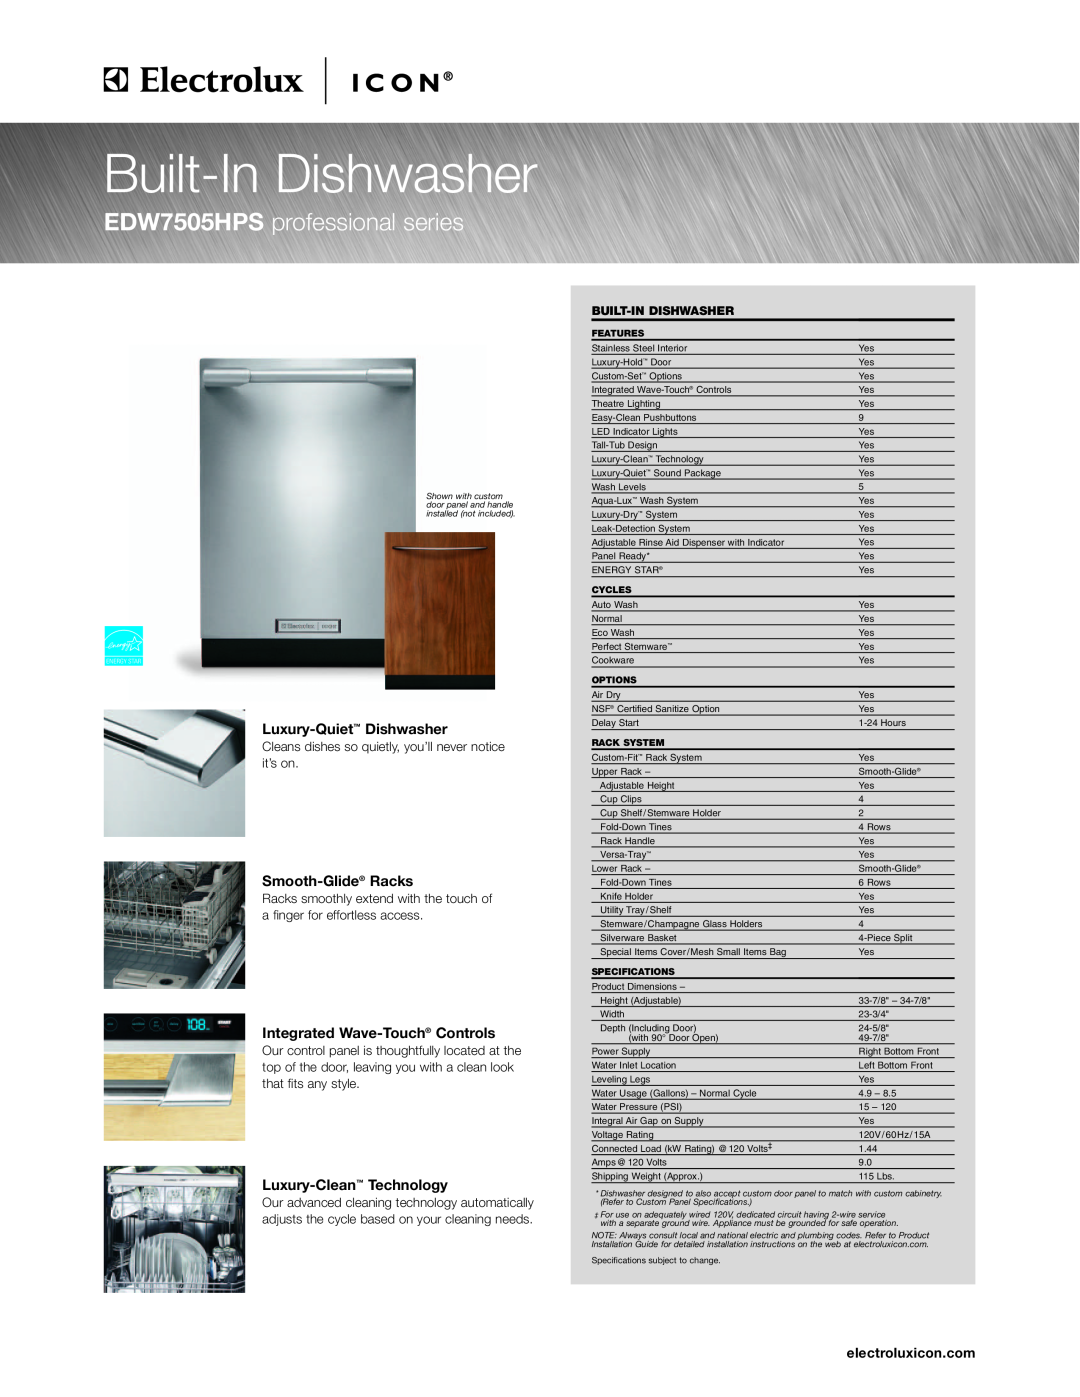 Electrolux specifications electroluxicon.com, Built-In Dishwasher, EDW7505HPS professional series, Smooth-Glide Racks 